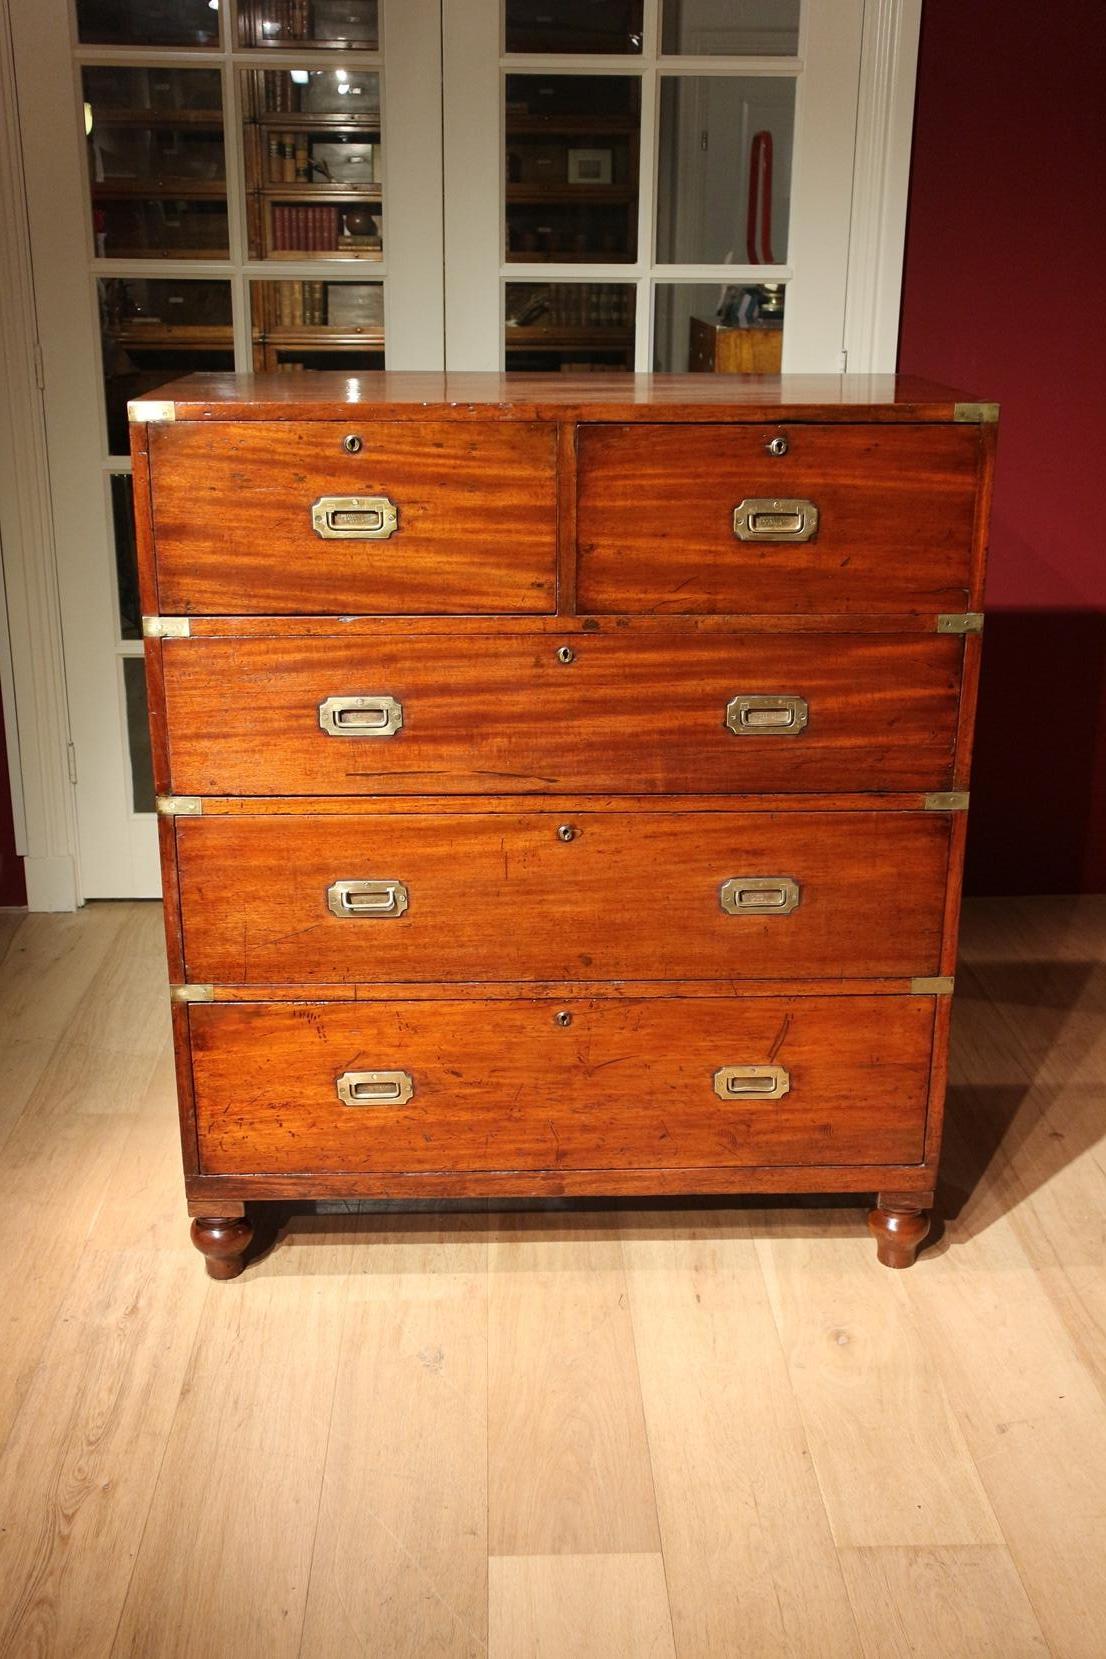 Beautiful antique mahogany Campaign chest with secretary from Ross & Co from Dublin. There is a secretary in the upper right drawer. The desk is beautifully finished with burr walnut around the leather and the drawers feature bleached maple veneer.